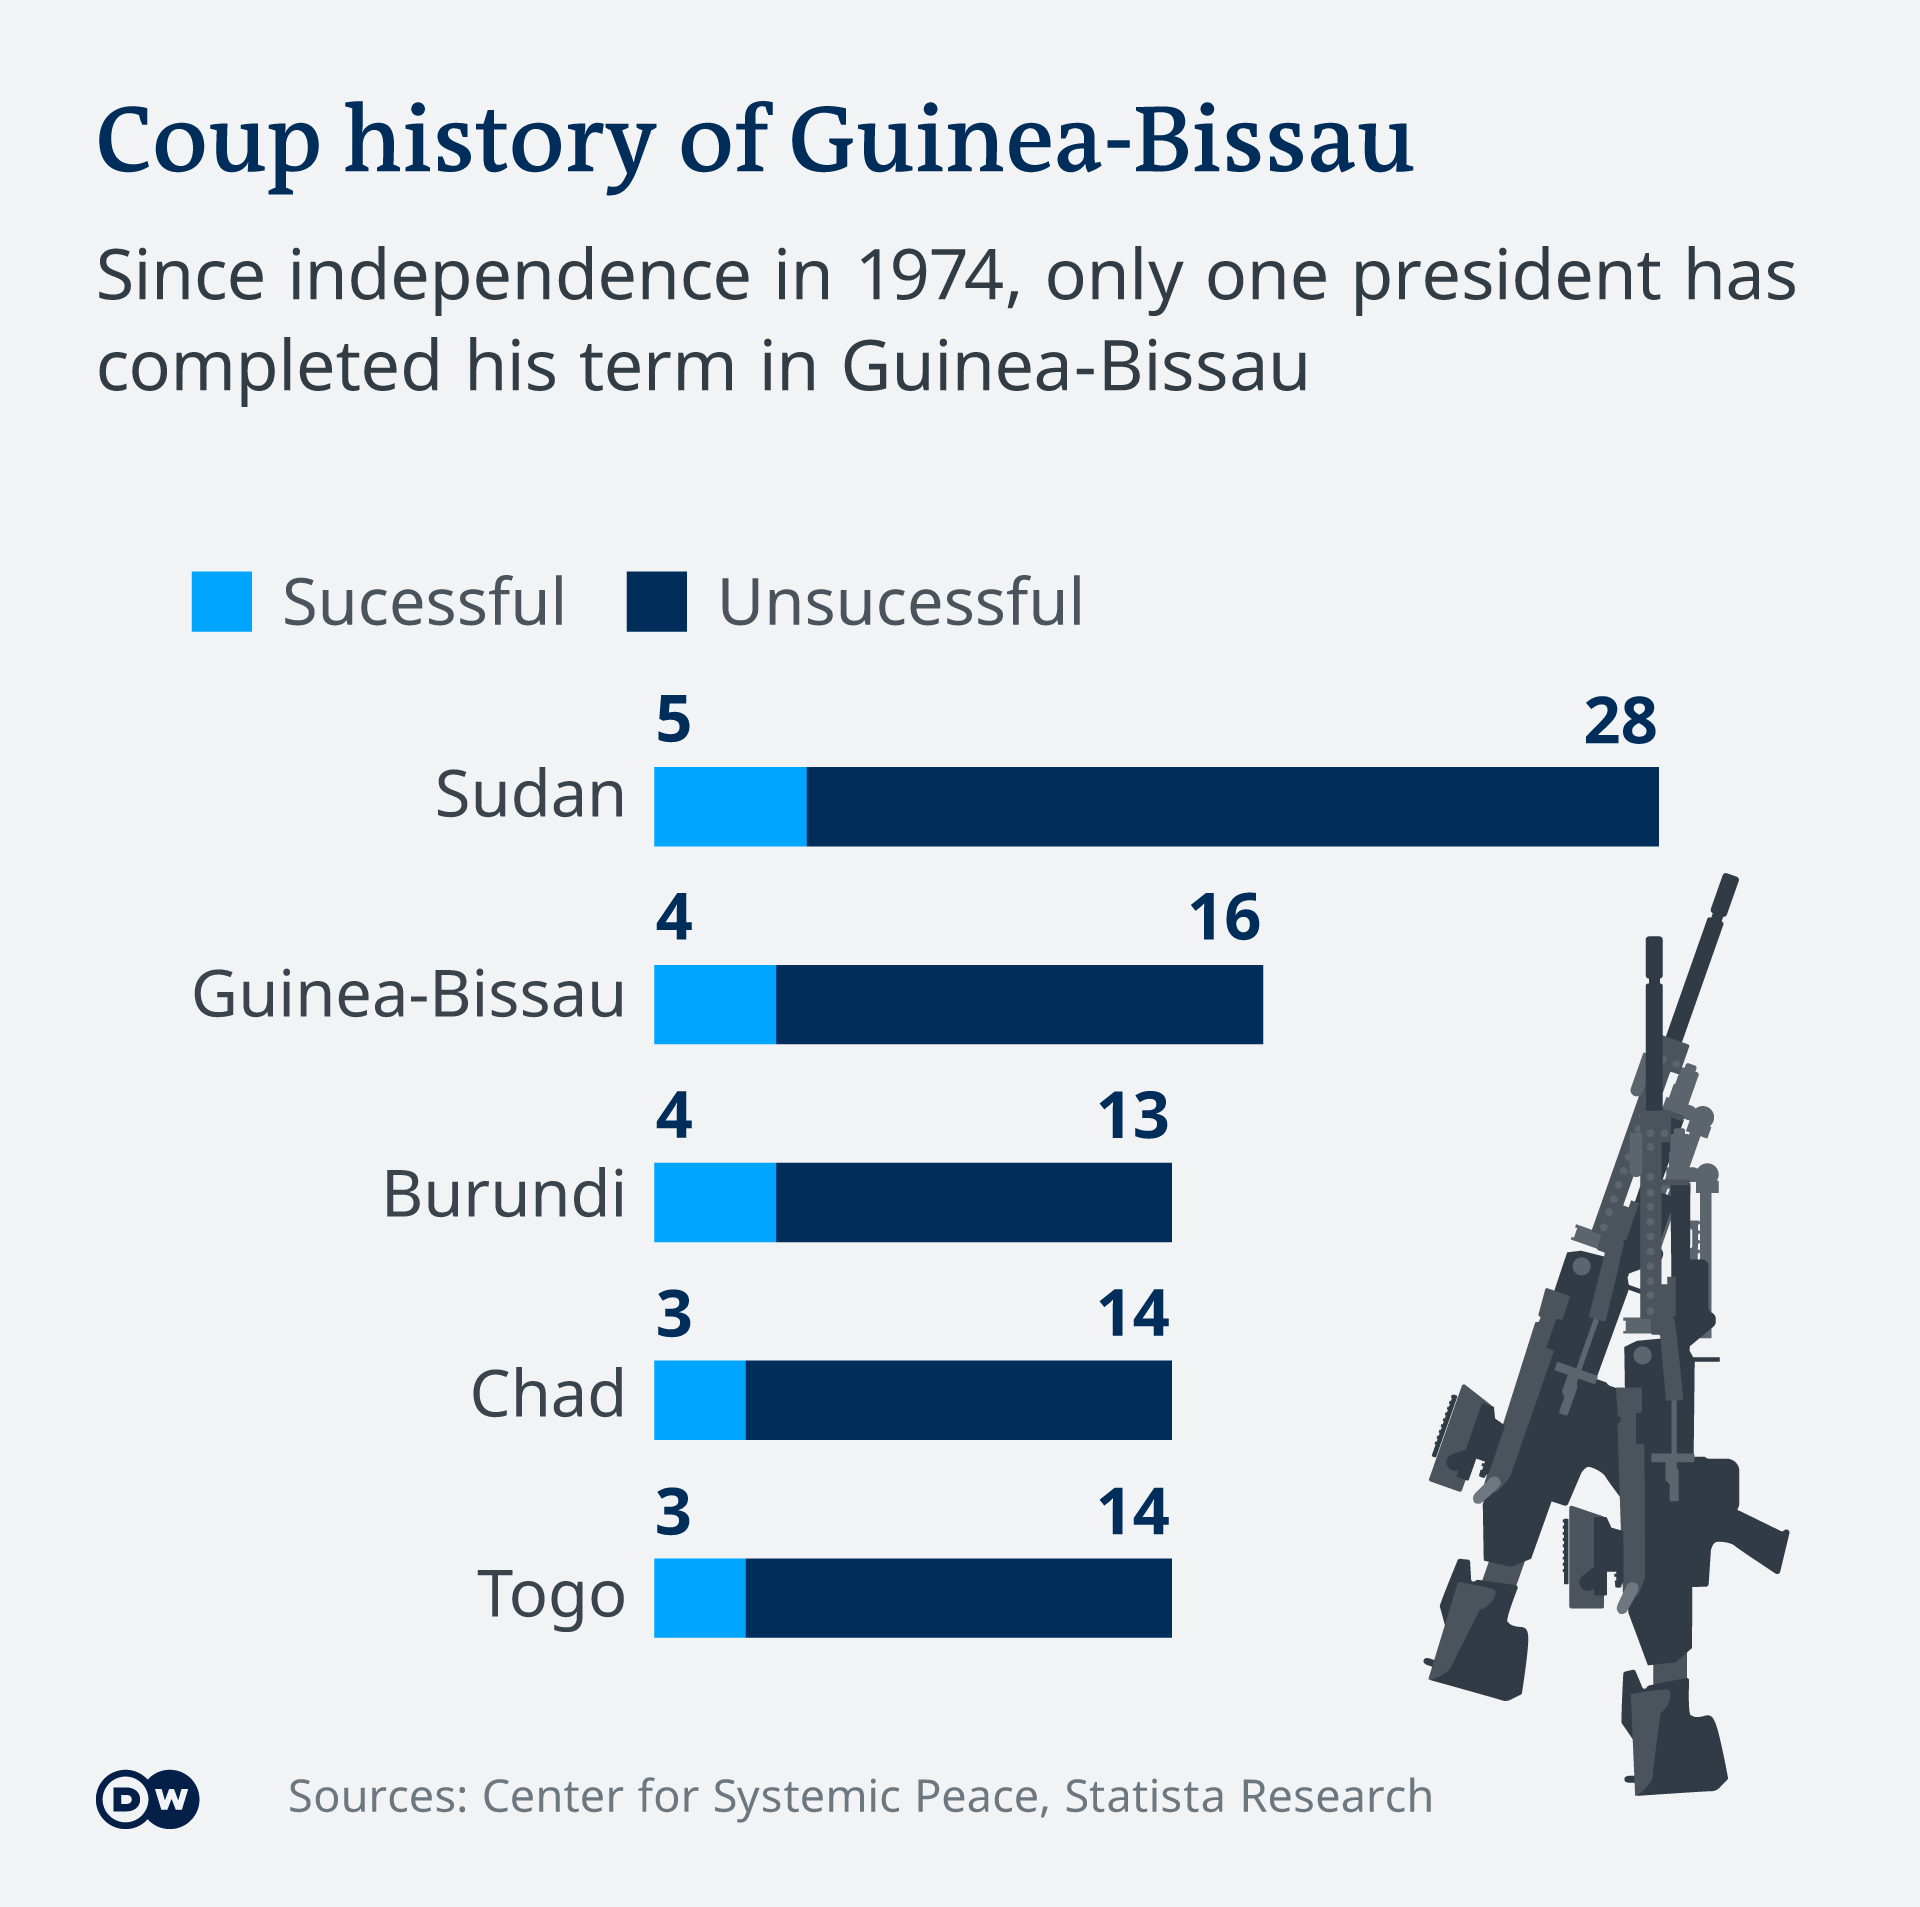 An infographic comparing the number of coups in Guinea-Bissau compared to other African nations